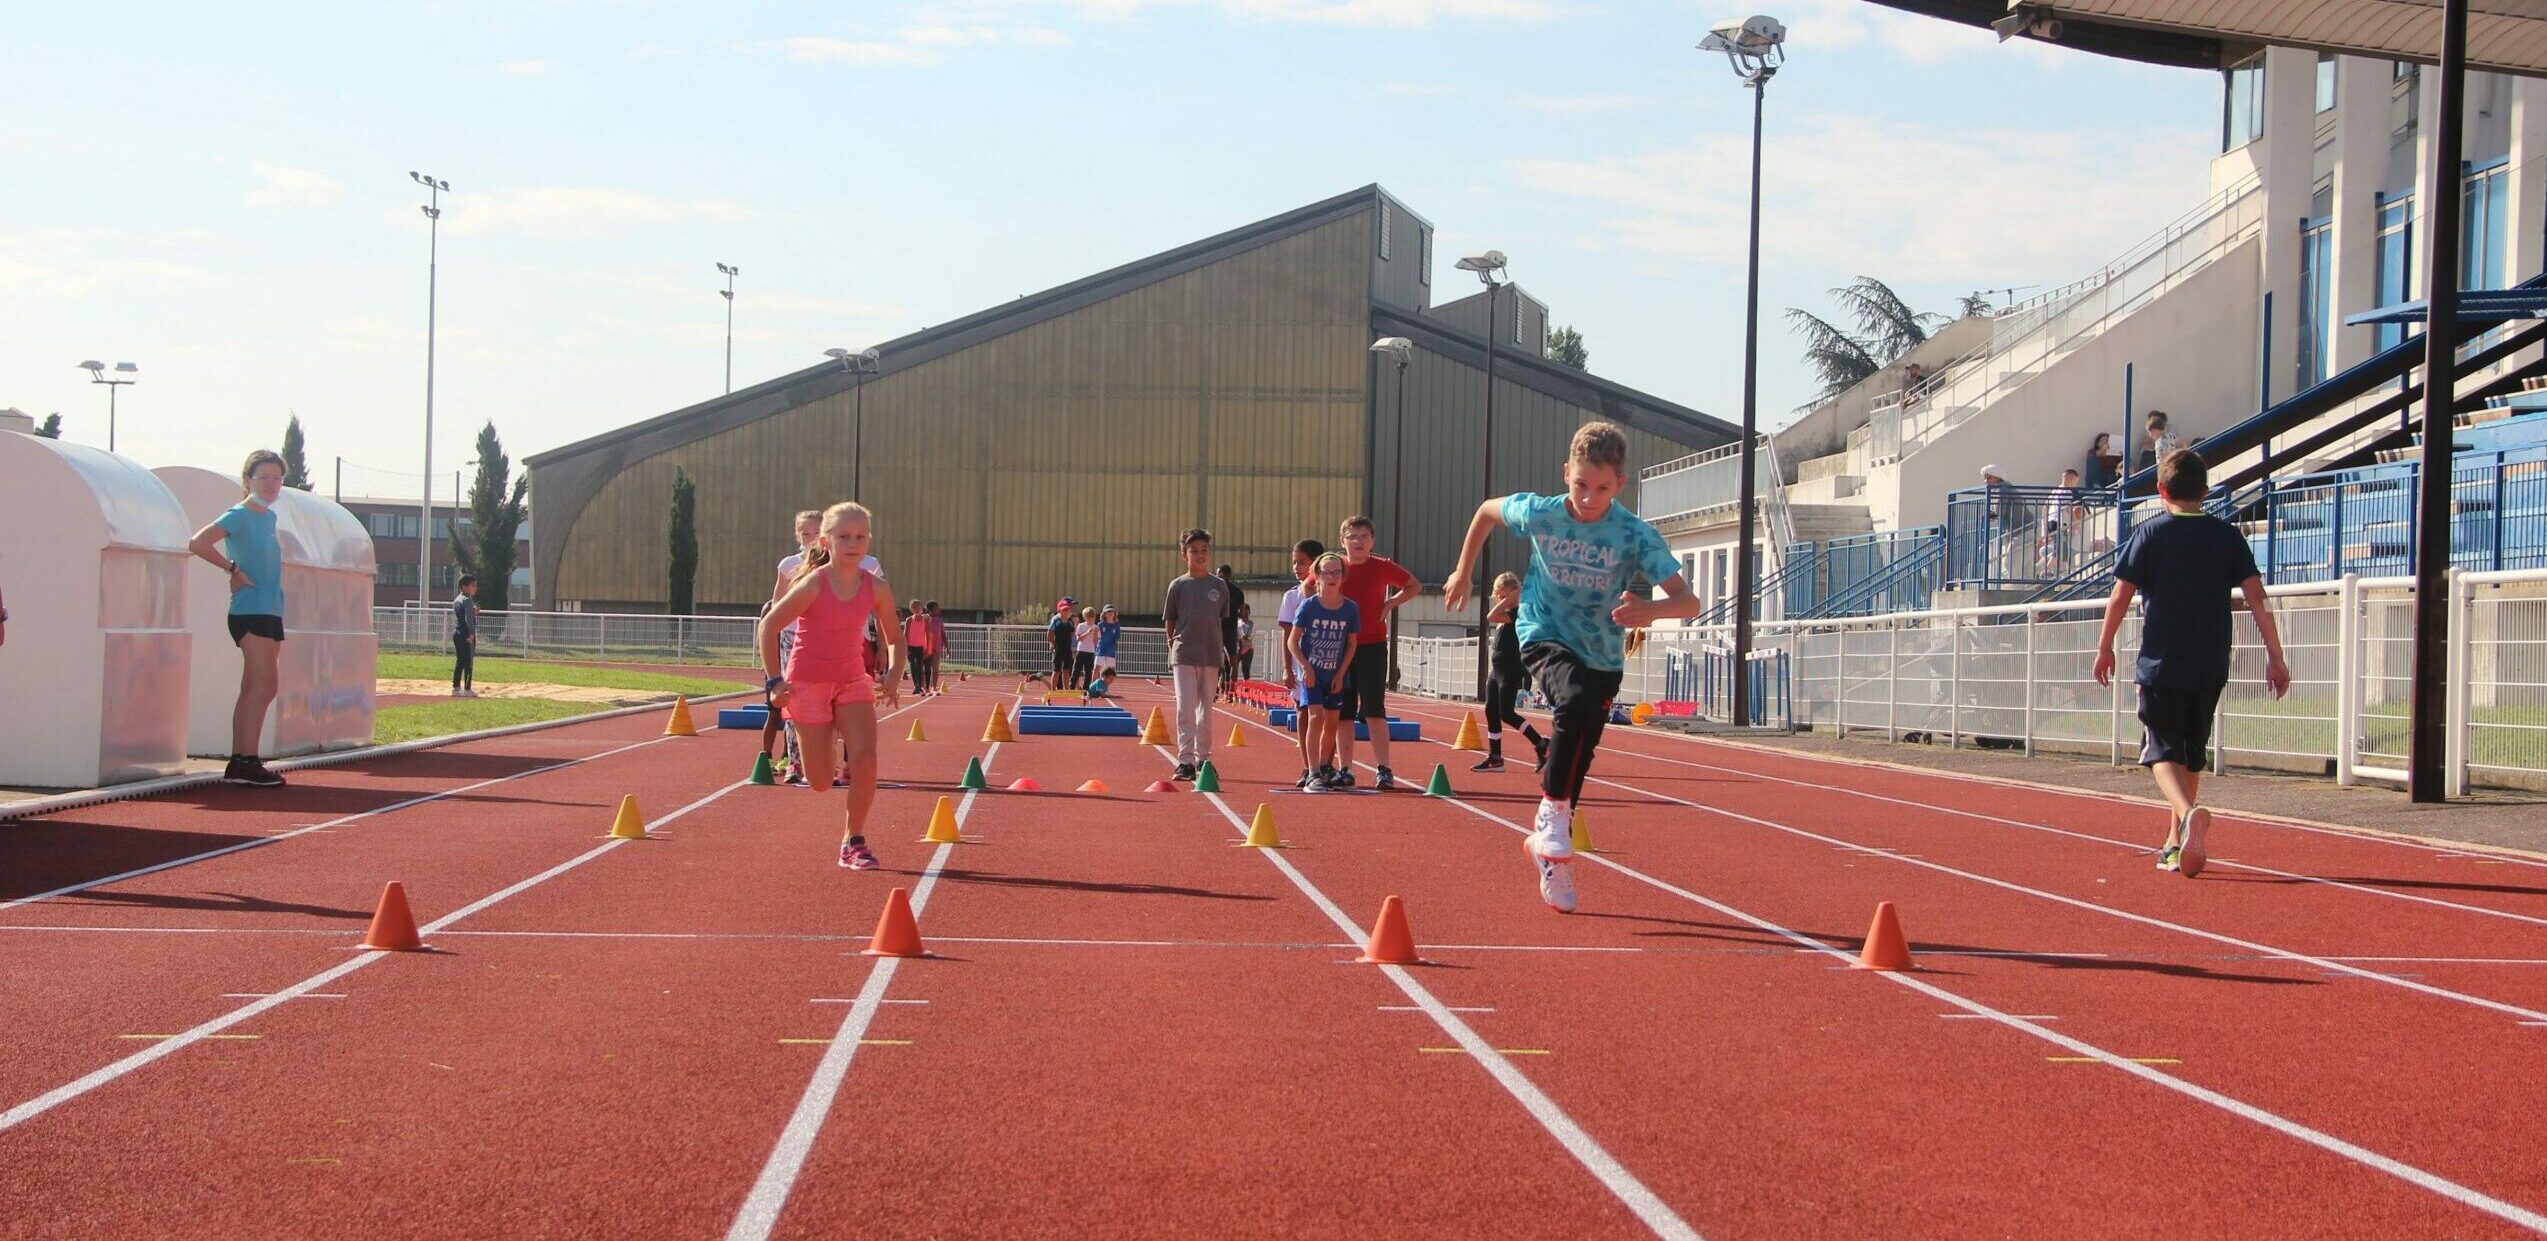 You are currently viewing Programme septembre 2022 : Kinder Athletics Day et Run 2K Challenge